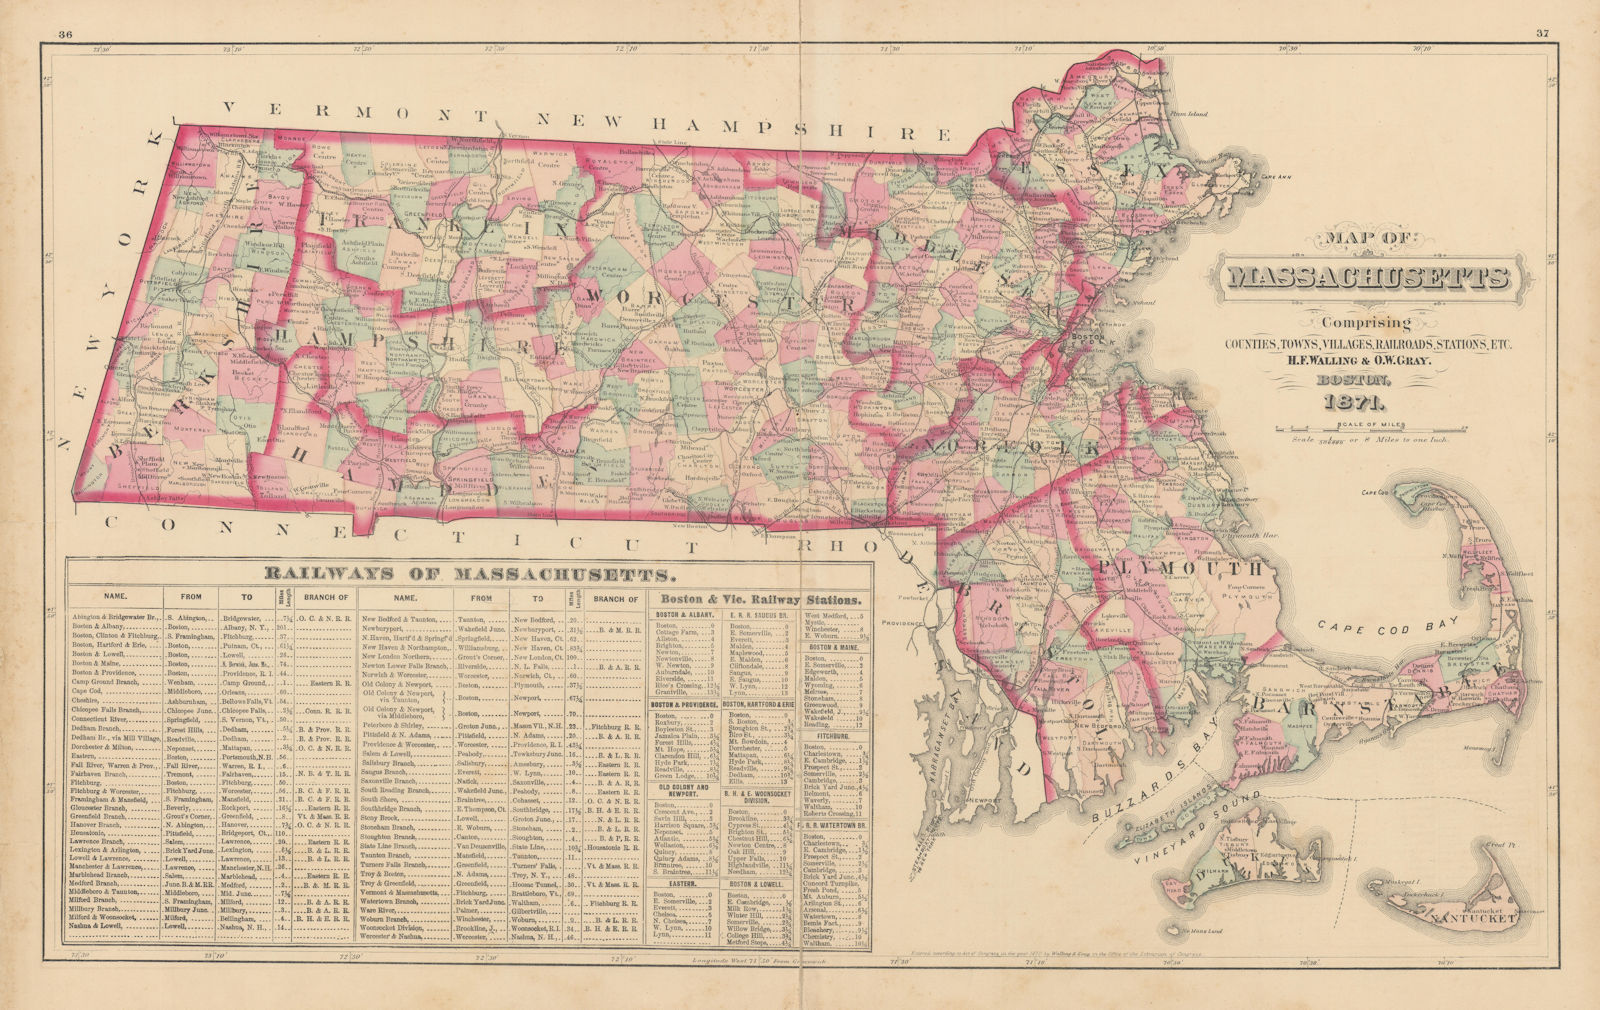 Associate Product Map of Massachusetts comprising counties, towns… WALLING & GRAY 1871 old